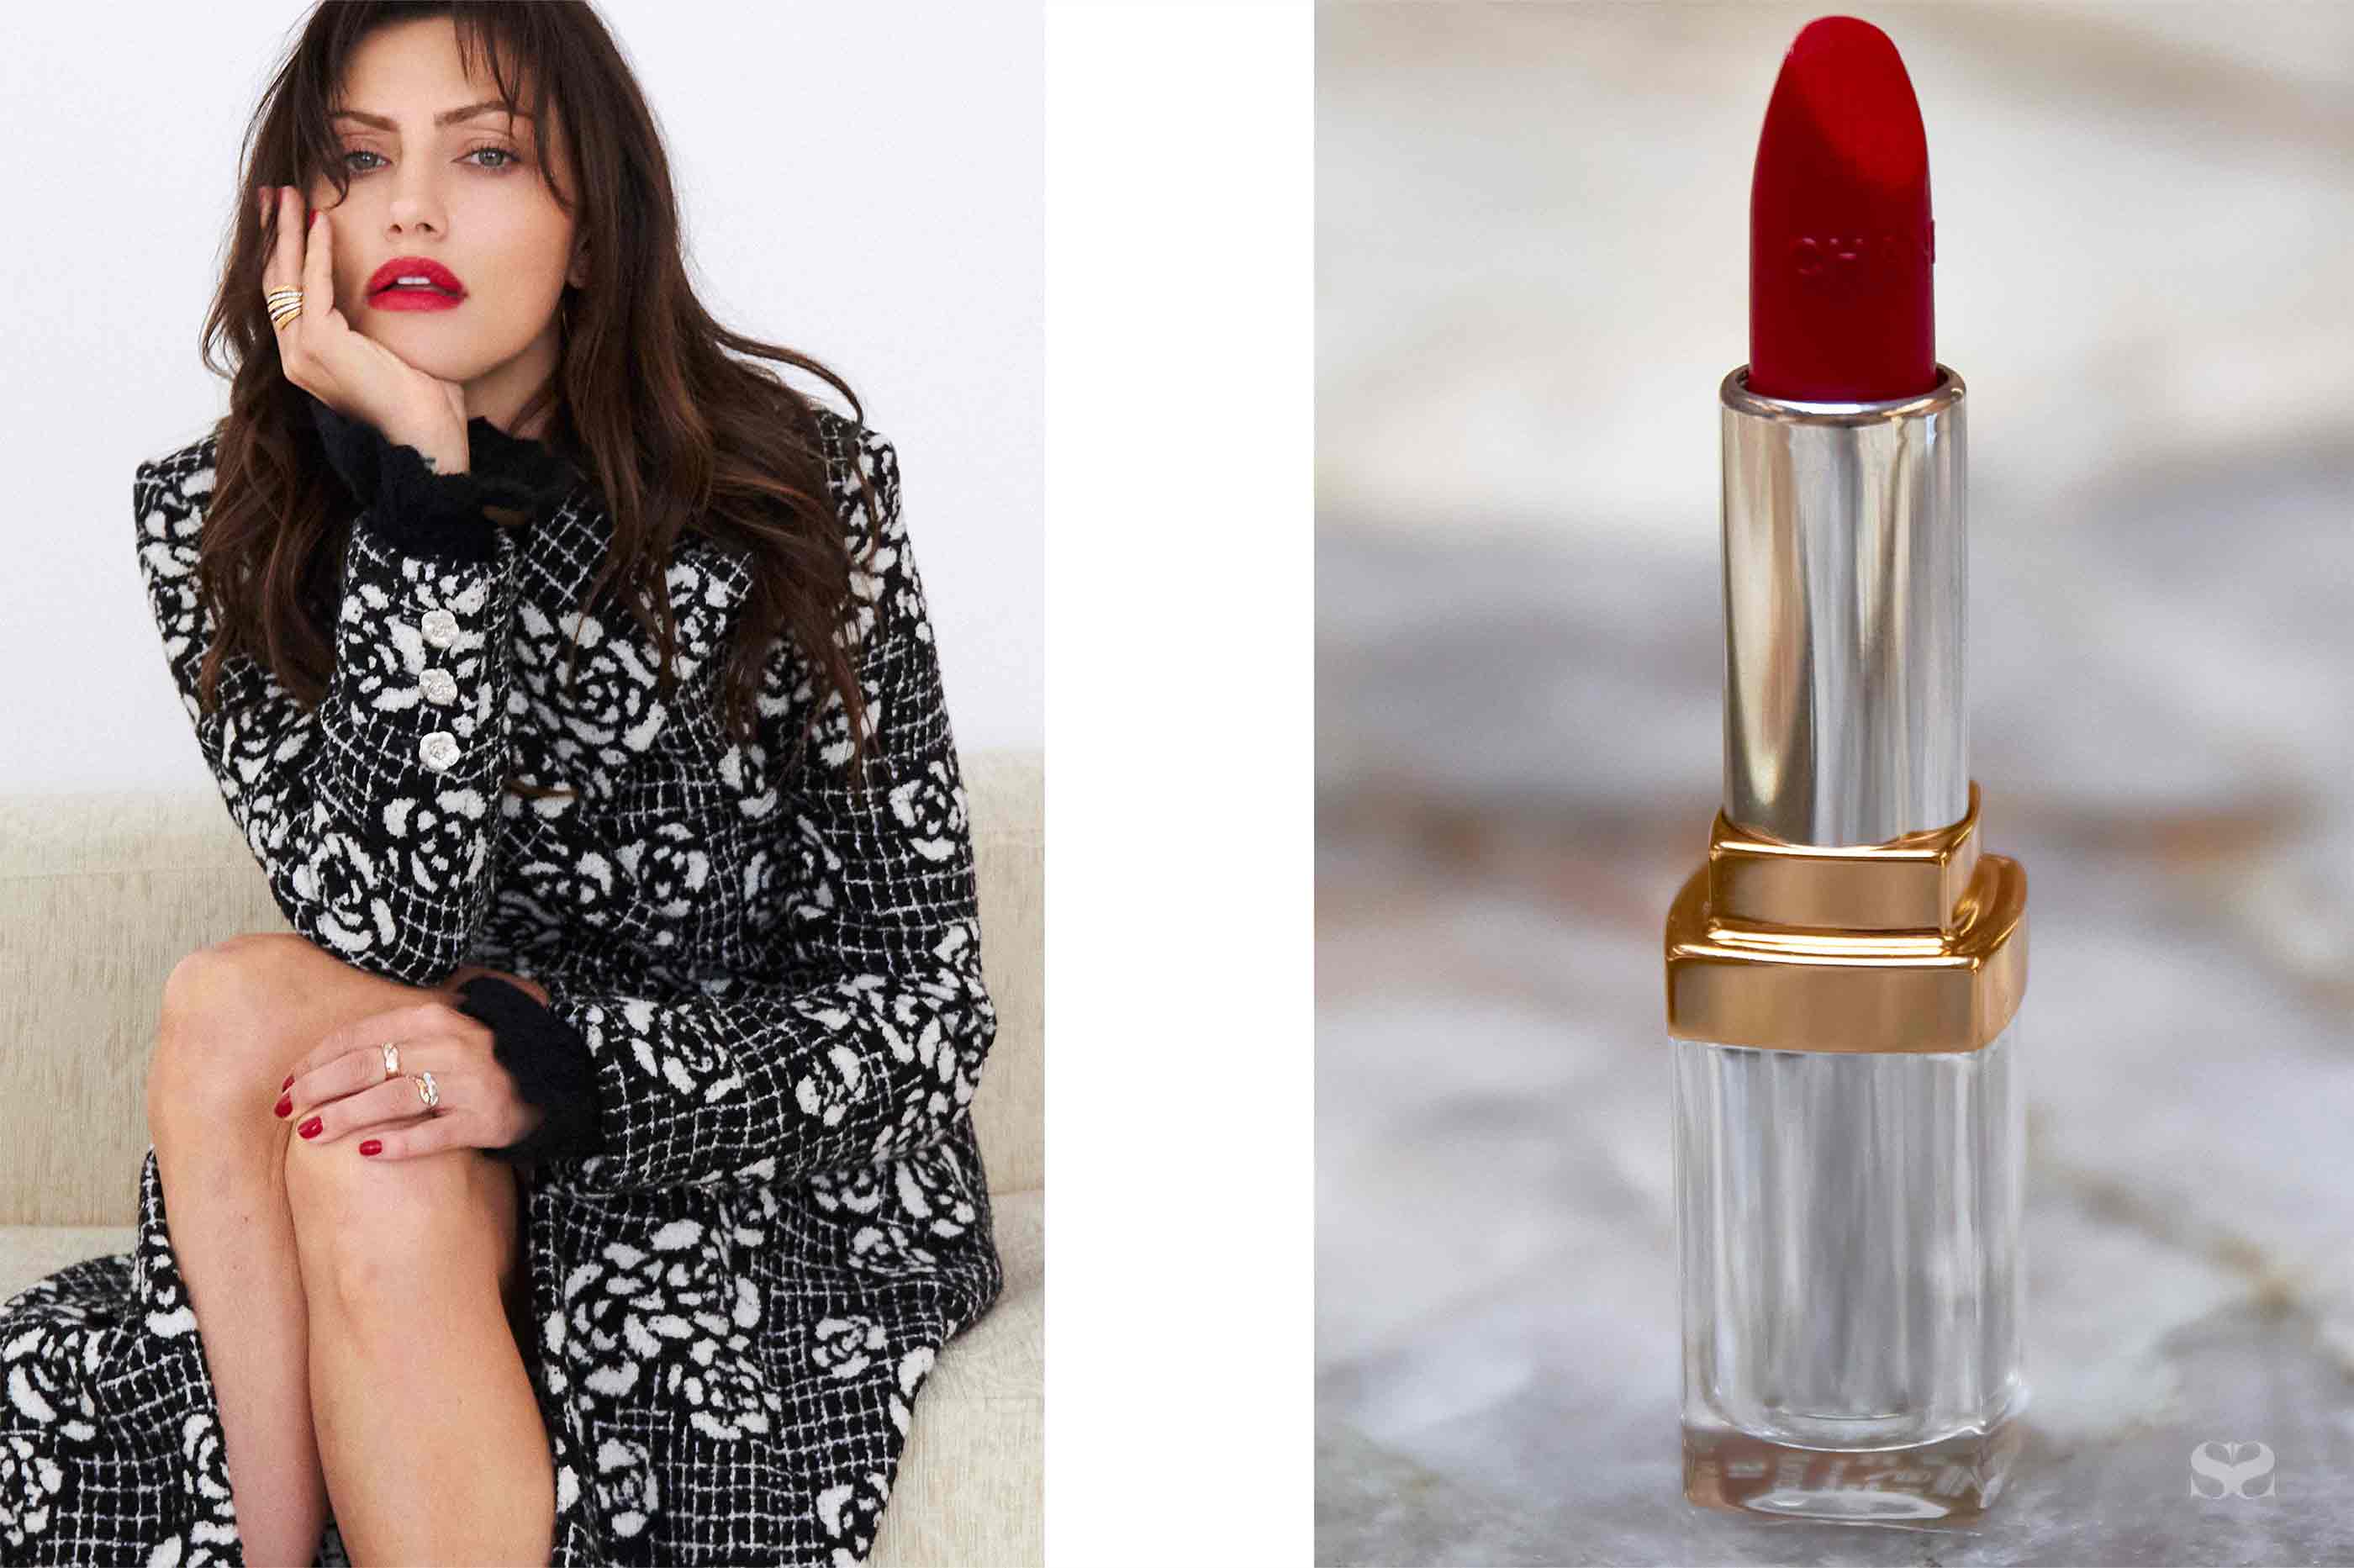 Chanel 31 Le Rouge Lipsticks Are Here + More Beauty News - FASHION Magazine